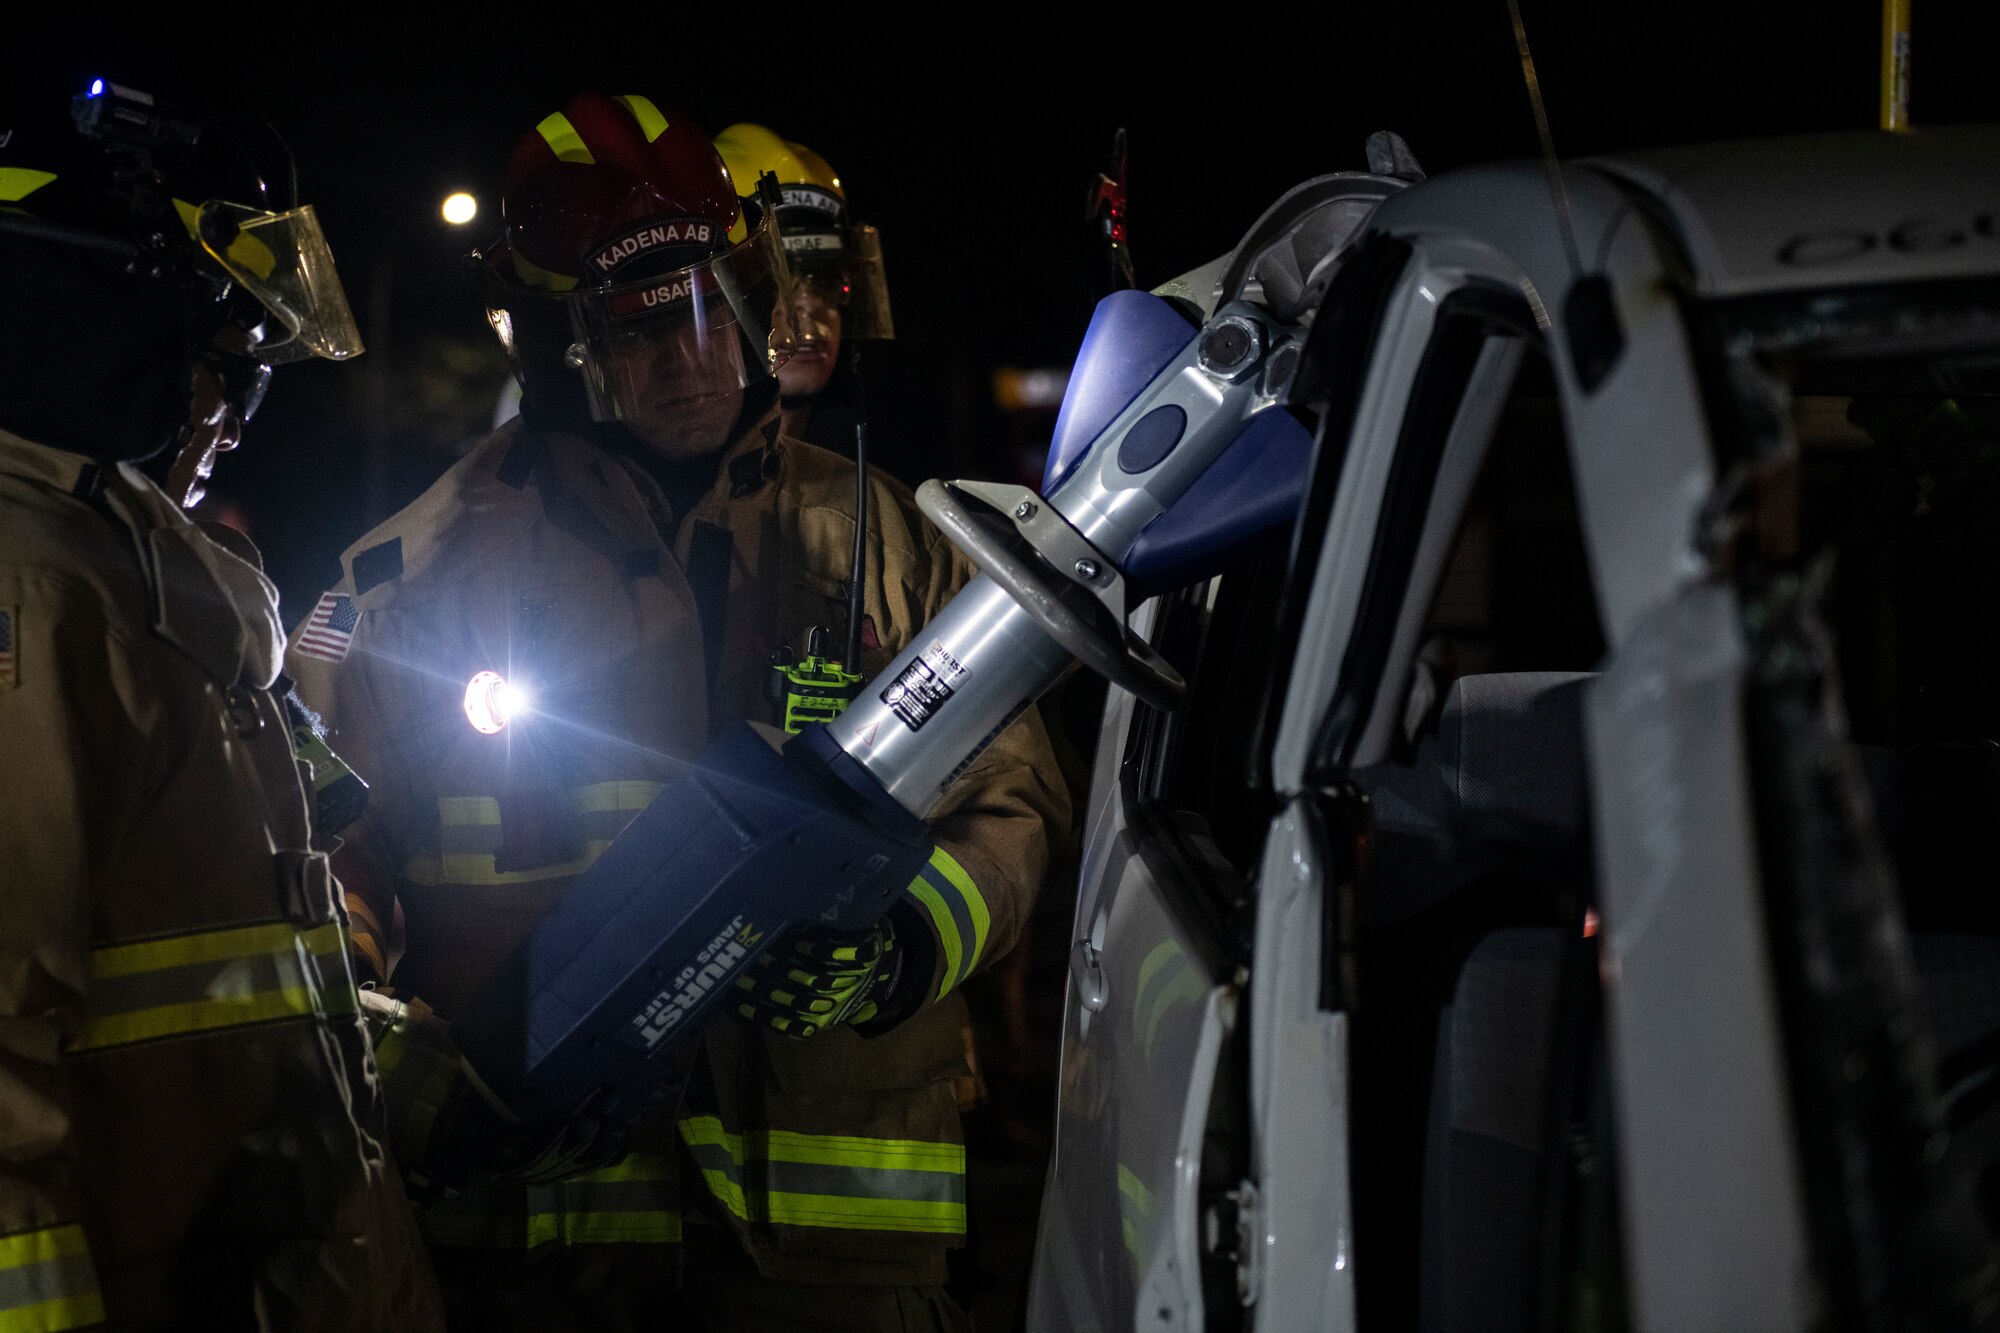 U.S. Air Force Staff Sgt. Garrett Morrison, 18th Civil Engineering Squadron firefighter, uses hydraulic cutters to dismantle a vehicle during a Fire Prevention Week demonstration at Kadena Air Base, Japan, Oct. 7, 2021. Various hydraulic tools such as cutters, spreaders, and rams are used by emergency rescue personnel to assist in the extrication of victims from vehicle accidents. (U.S. Air Force photo by Senior Airman Jessi Monte)